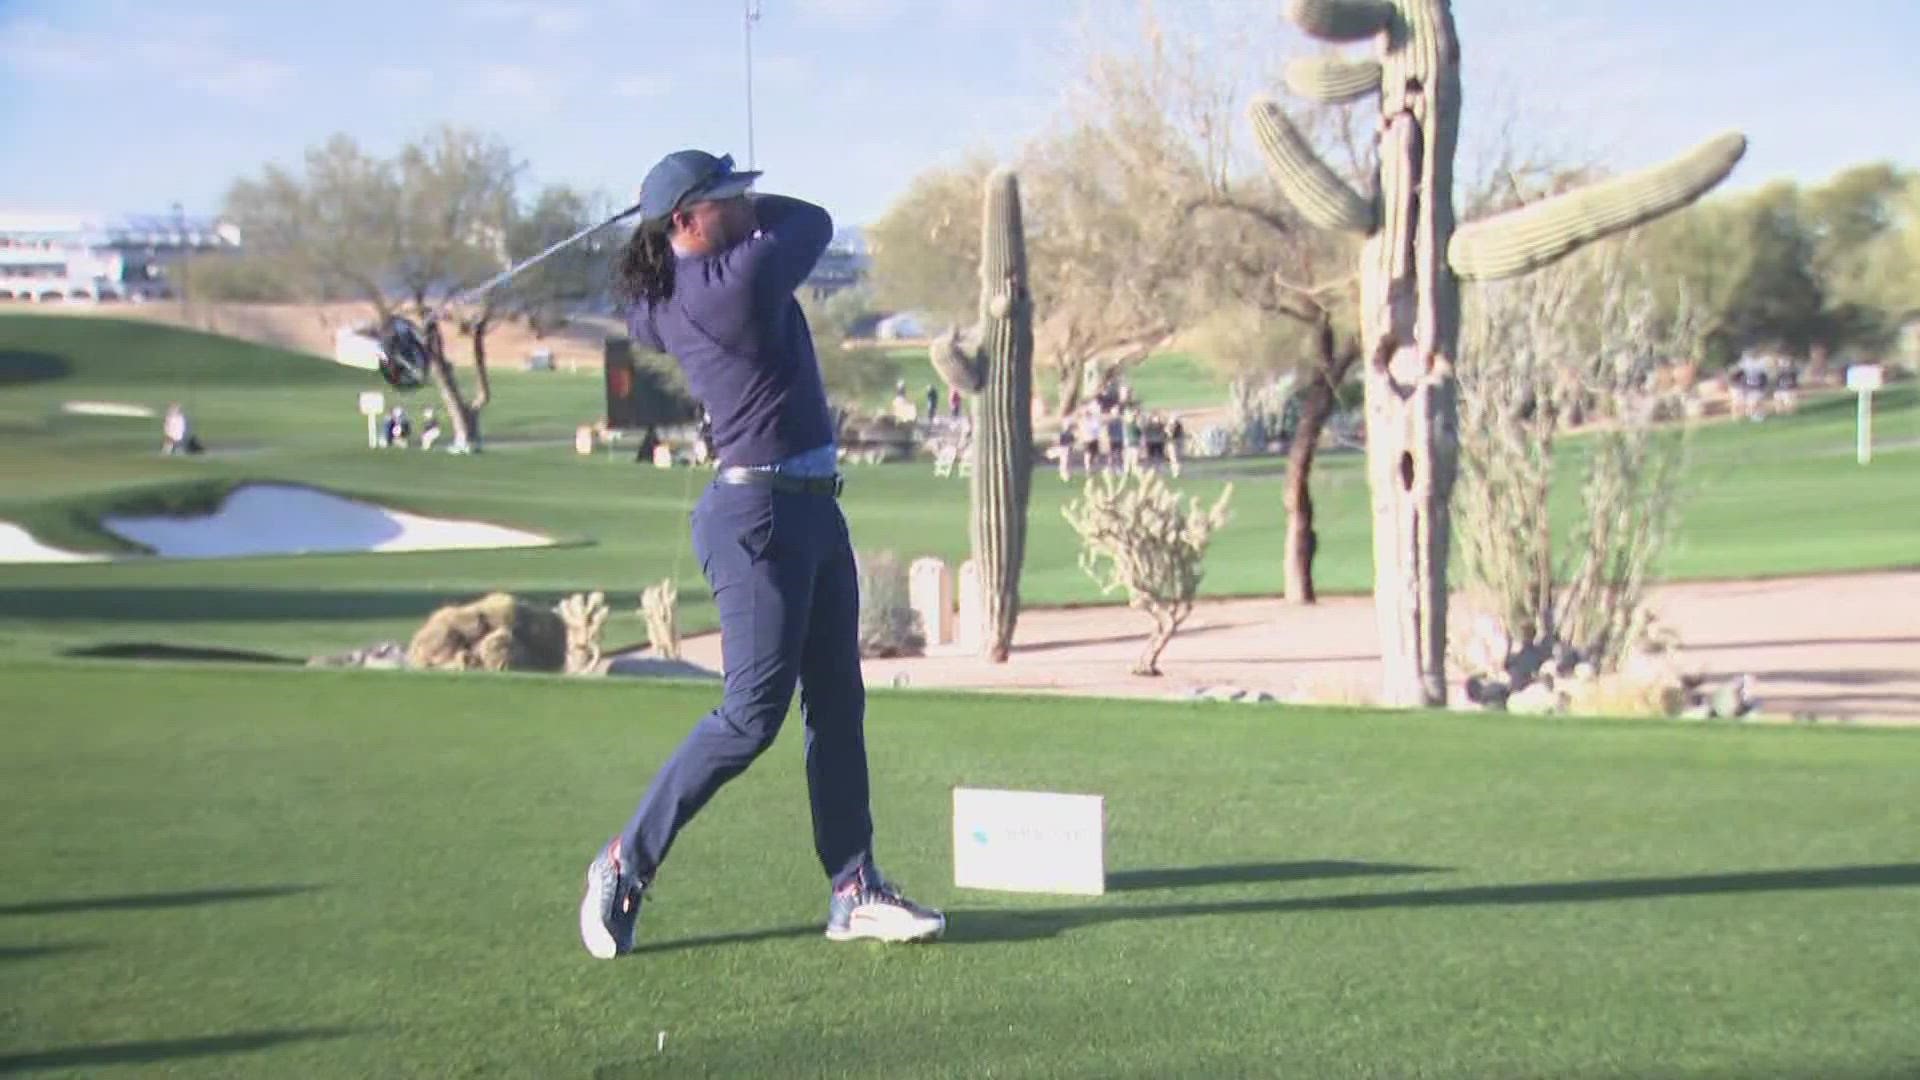 Fitzgerald tees off at the TPC Scottsdale Stadium Course during the WM Phoenix Open Annexus Pro-Am.